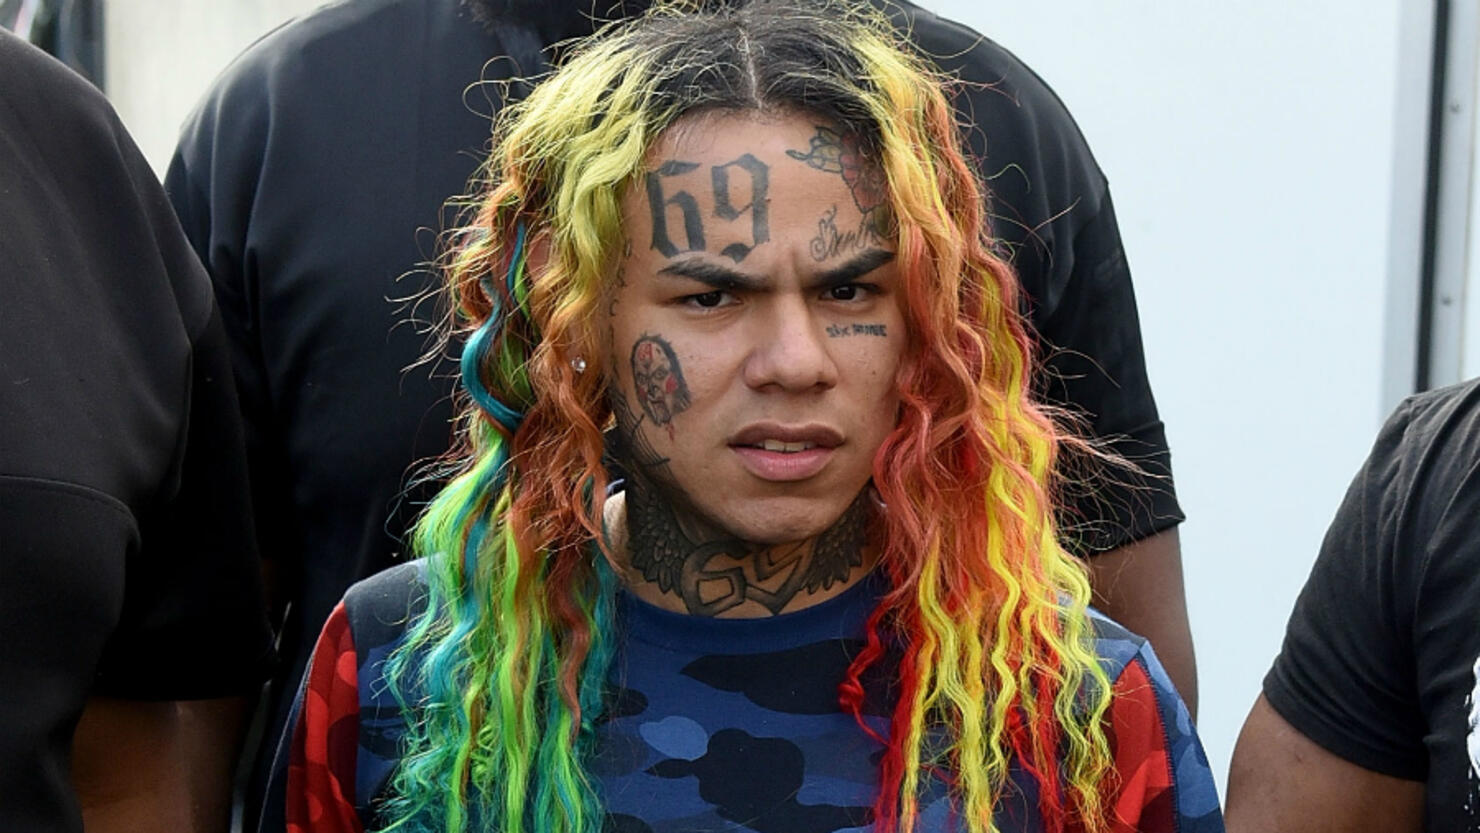 1. "Takashi 6ix9ine Shows Off New Blue Hair on Instagram" 
2. "Takashi 6ix9ine's Blue Hair Sparks Controversy on Social Media" 
3. "Takashi 6ix9ine's Blue Hair: A Look Back at His Ever-Changing Hairstyles" 
4. "Takashi 6ix9ine's Blue Hair: The Meaning Behind the Color" 
5. "Takashi 6ix9ine's Blue Hair: How to Achieve the Look" 
6. "Takashi 6ix9ine's Blue Hair: Fans React to His Bold New Look" 
7. "Takashi 6ix9ine's Blue Hair: A Timeline of His Hair Evolution" 
8. "Takashi 6ix9ine's Blue Hair: The Inspiration Behind the Color" 
9. "Takashi 6ix9ine's Blue Hair: The Controversy Surrounding His Hair Choices" 
10. "Takashi 6ix9ine's Blue Hair: The Impact of His Bold Style on Pop Culture" - wide 6